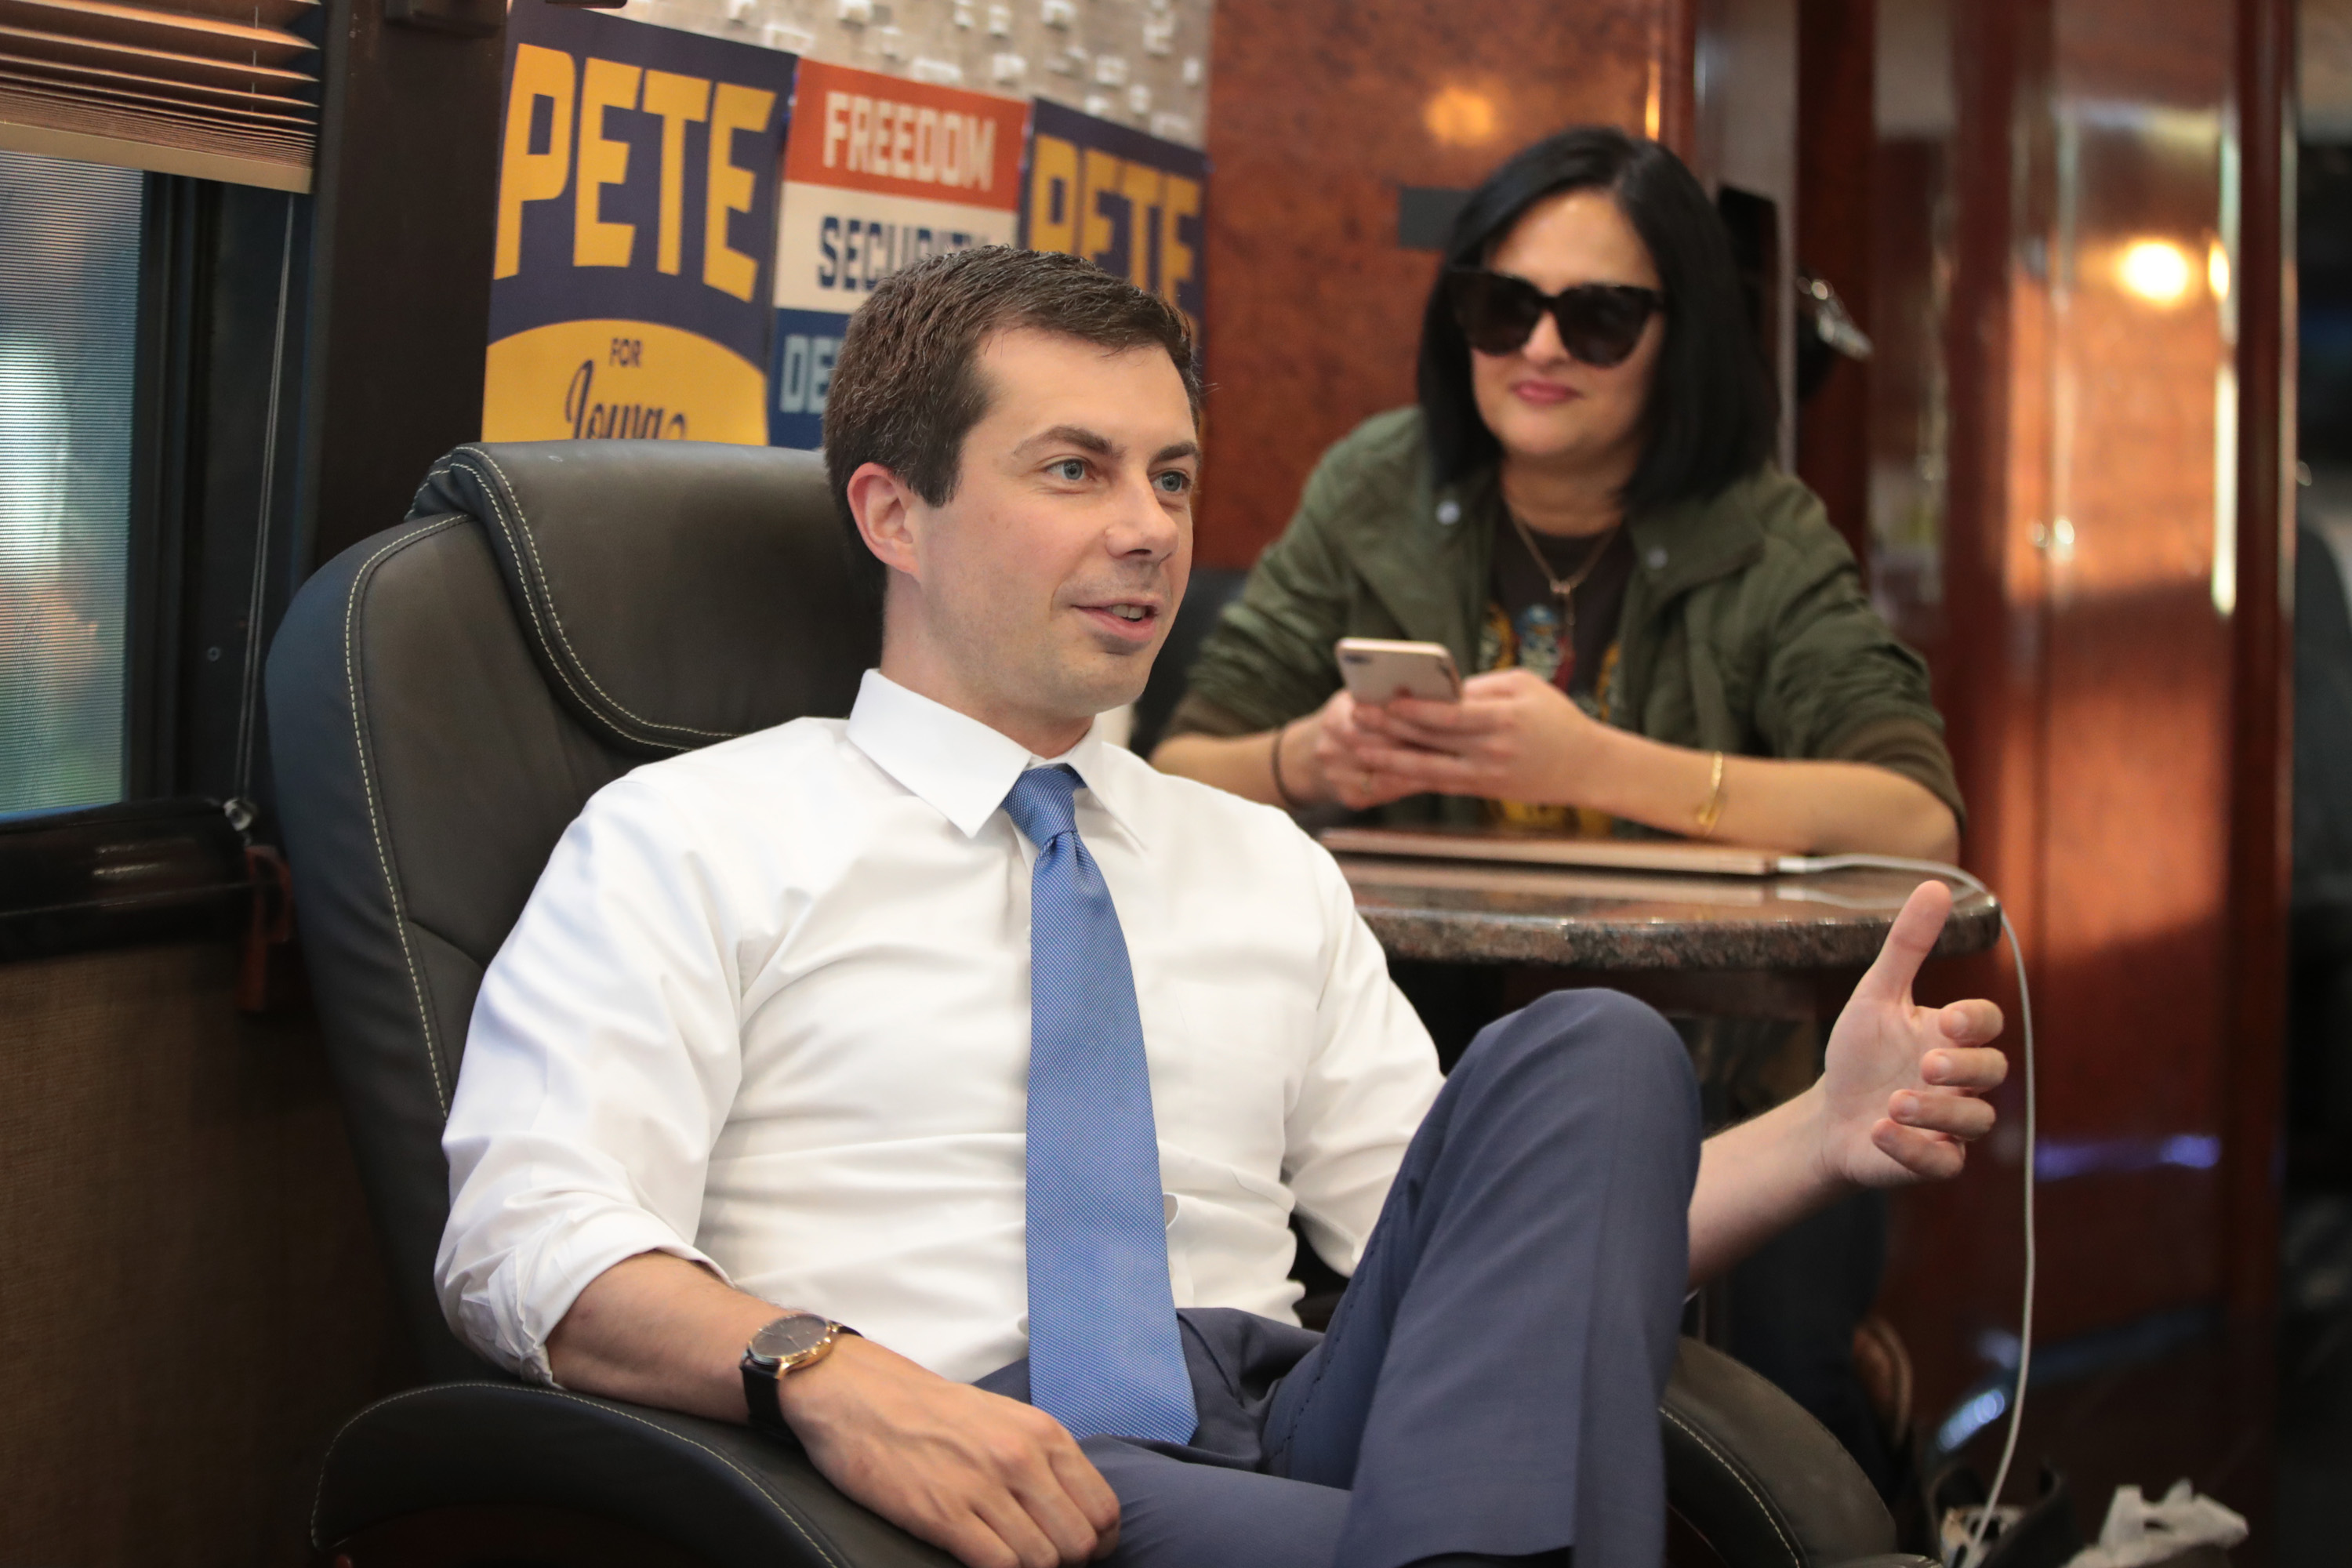 Democratic Presidential Candidate Pete Buttigieg Goes On Four Day Bus Campaign Swing Through Iowa